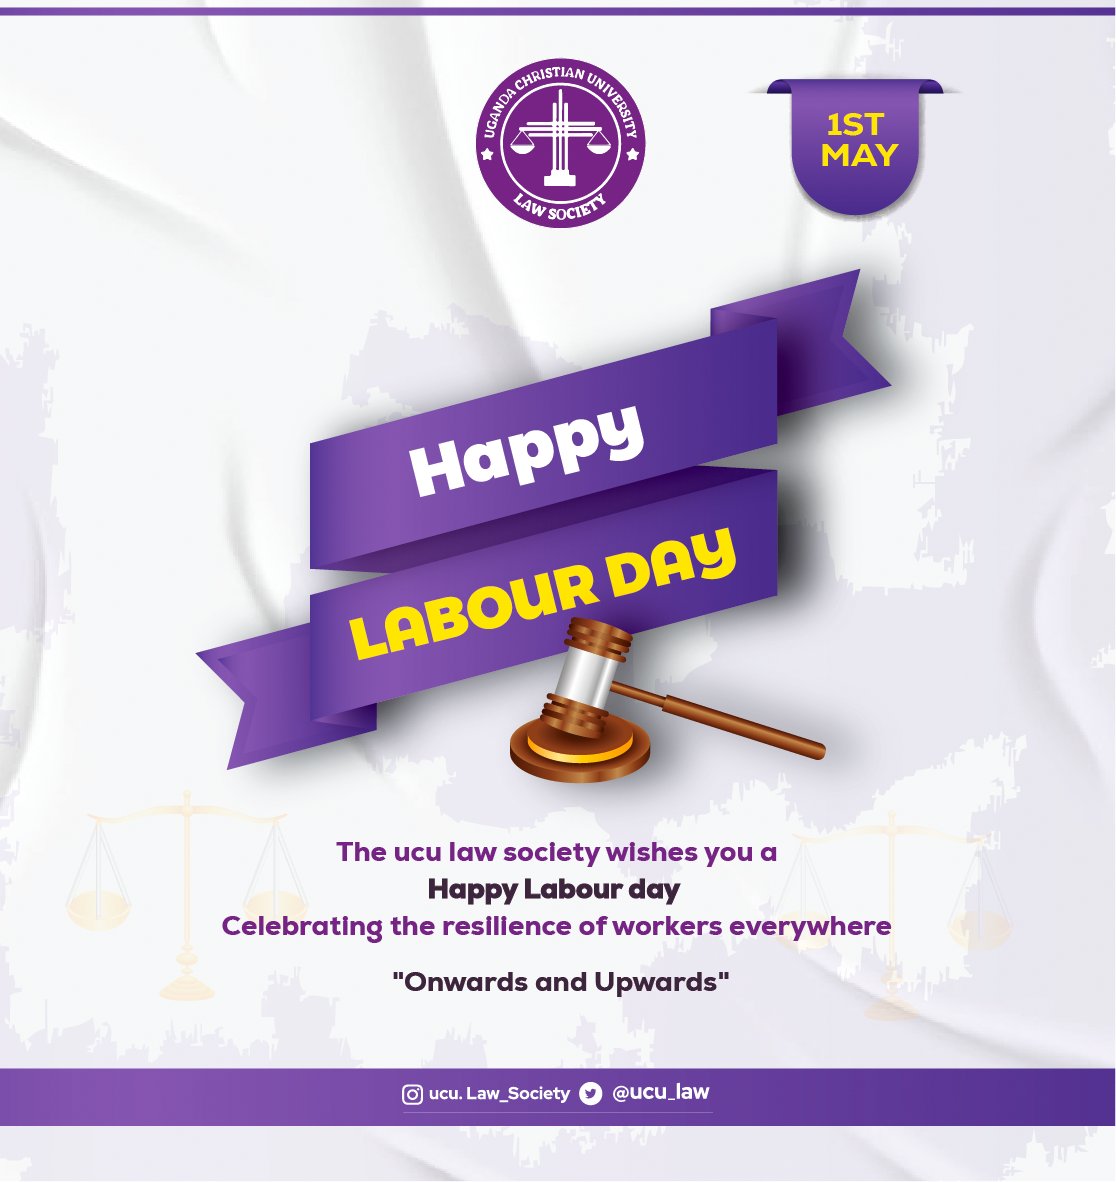 Happy labour day from the society thank you for the hard work. Let's fight for the rights of workers